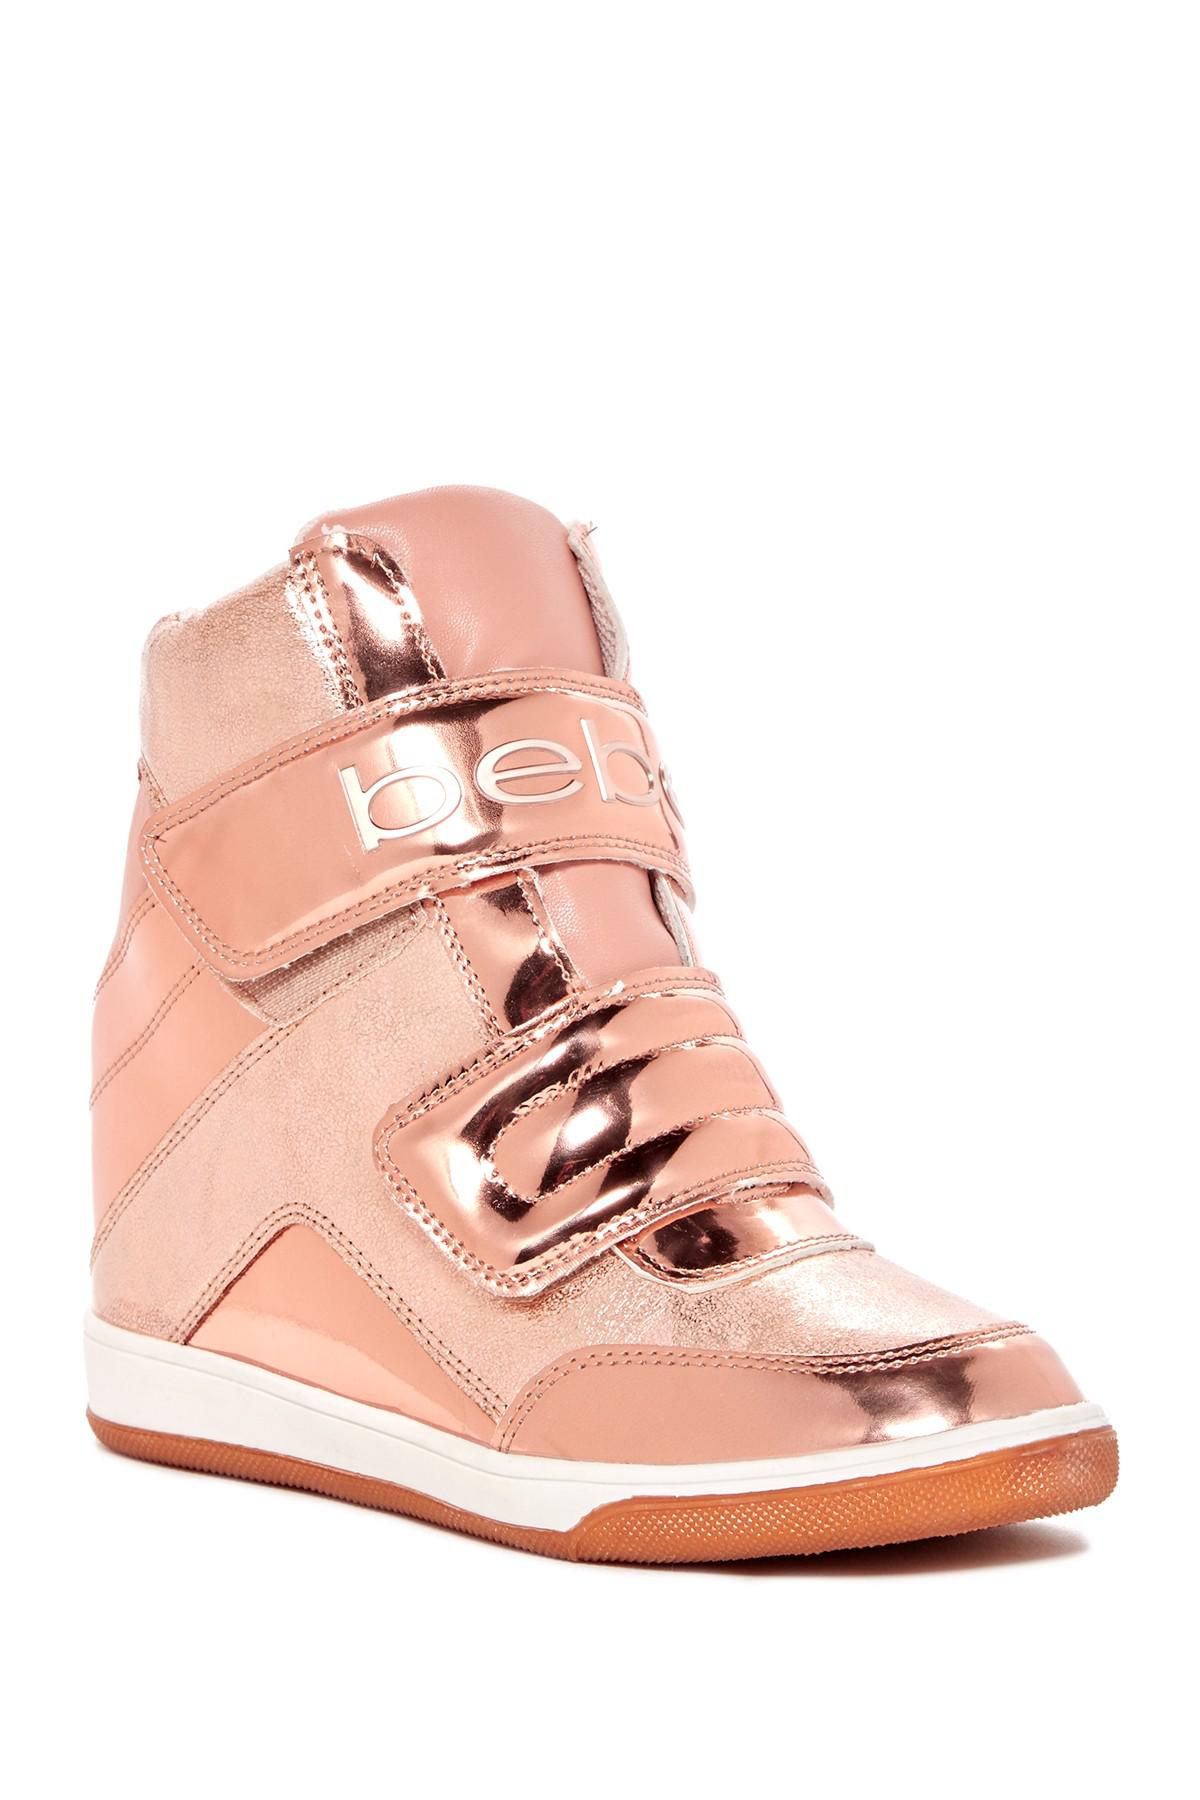 Cobble Wedge Sneaker in Rose Gold 